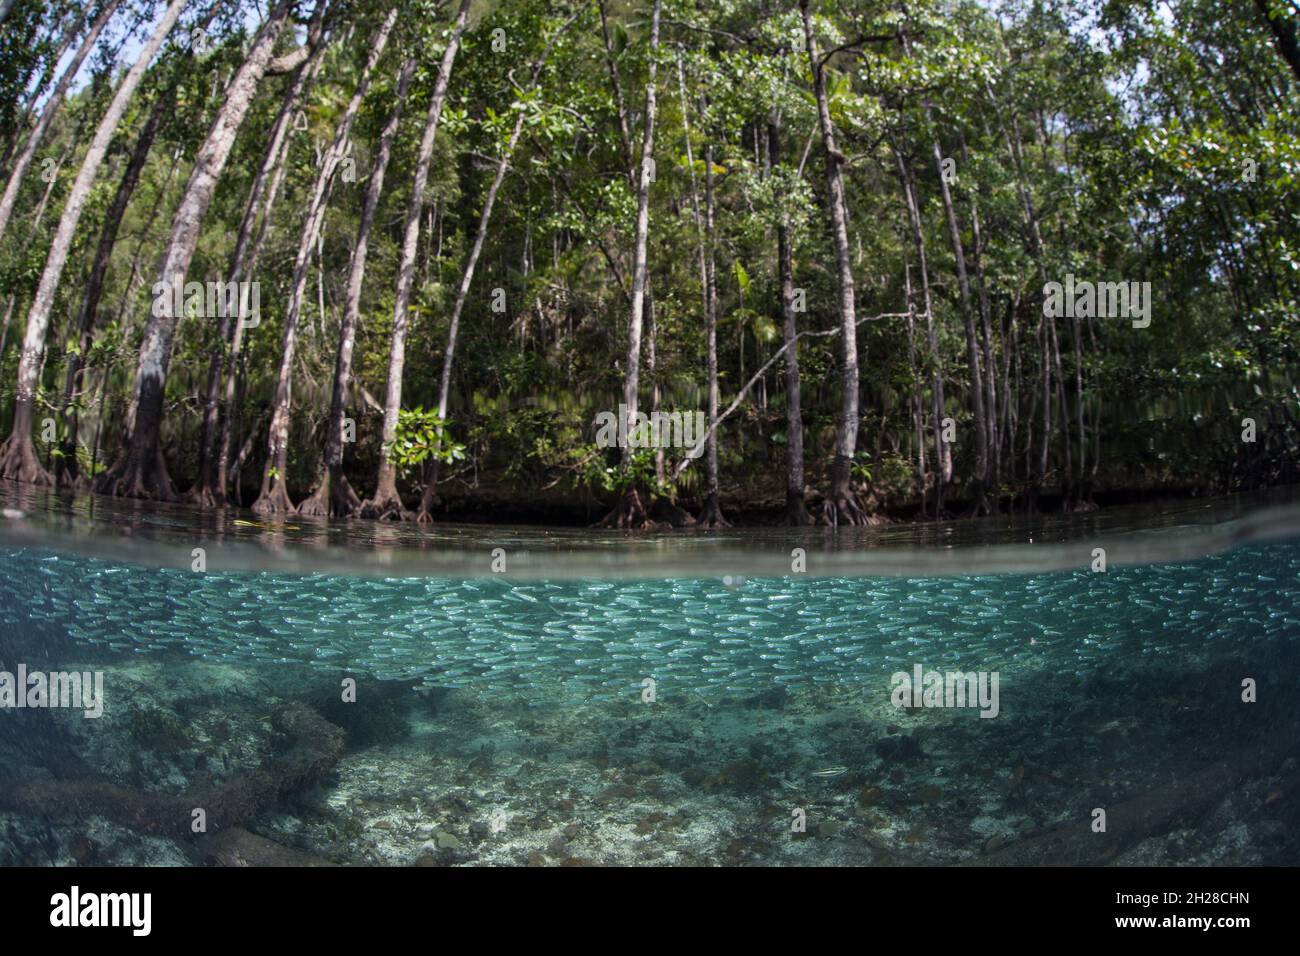 A school of silversides swims through a mangrove forest in Raja Ampat, Indonesia. This area is home to the highest marine biodiversity on Earth. Stock Photo